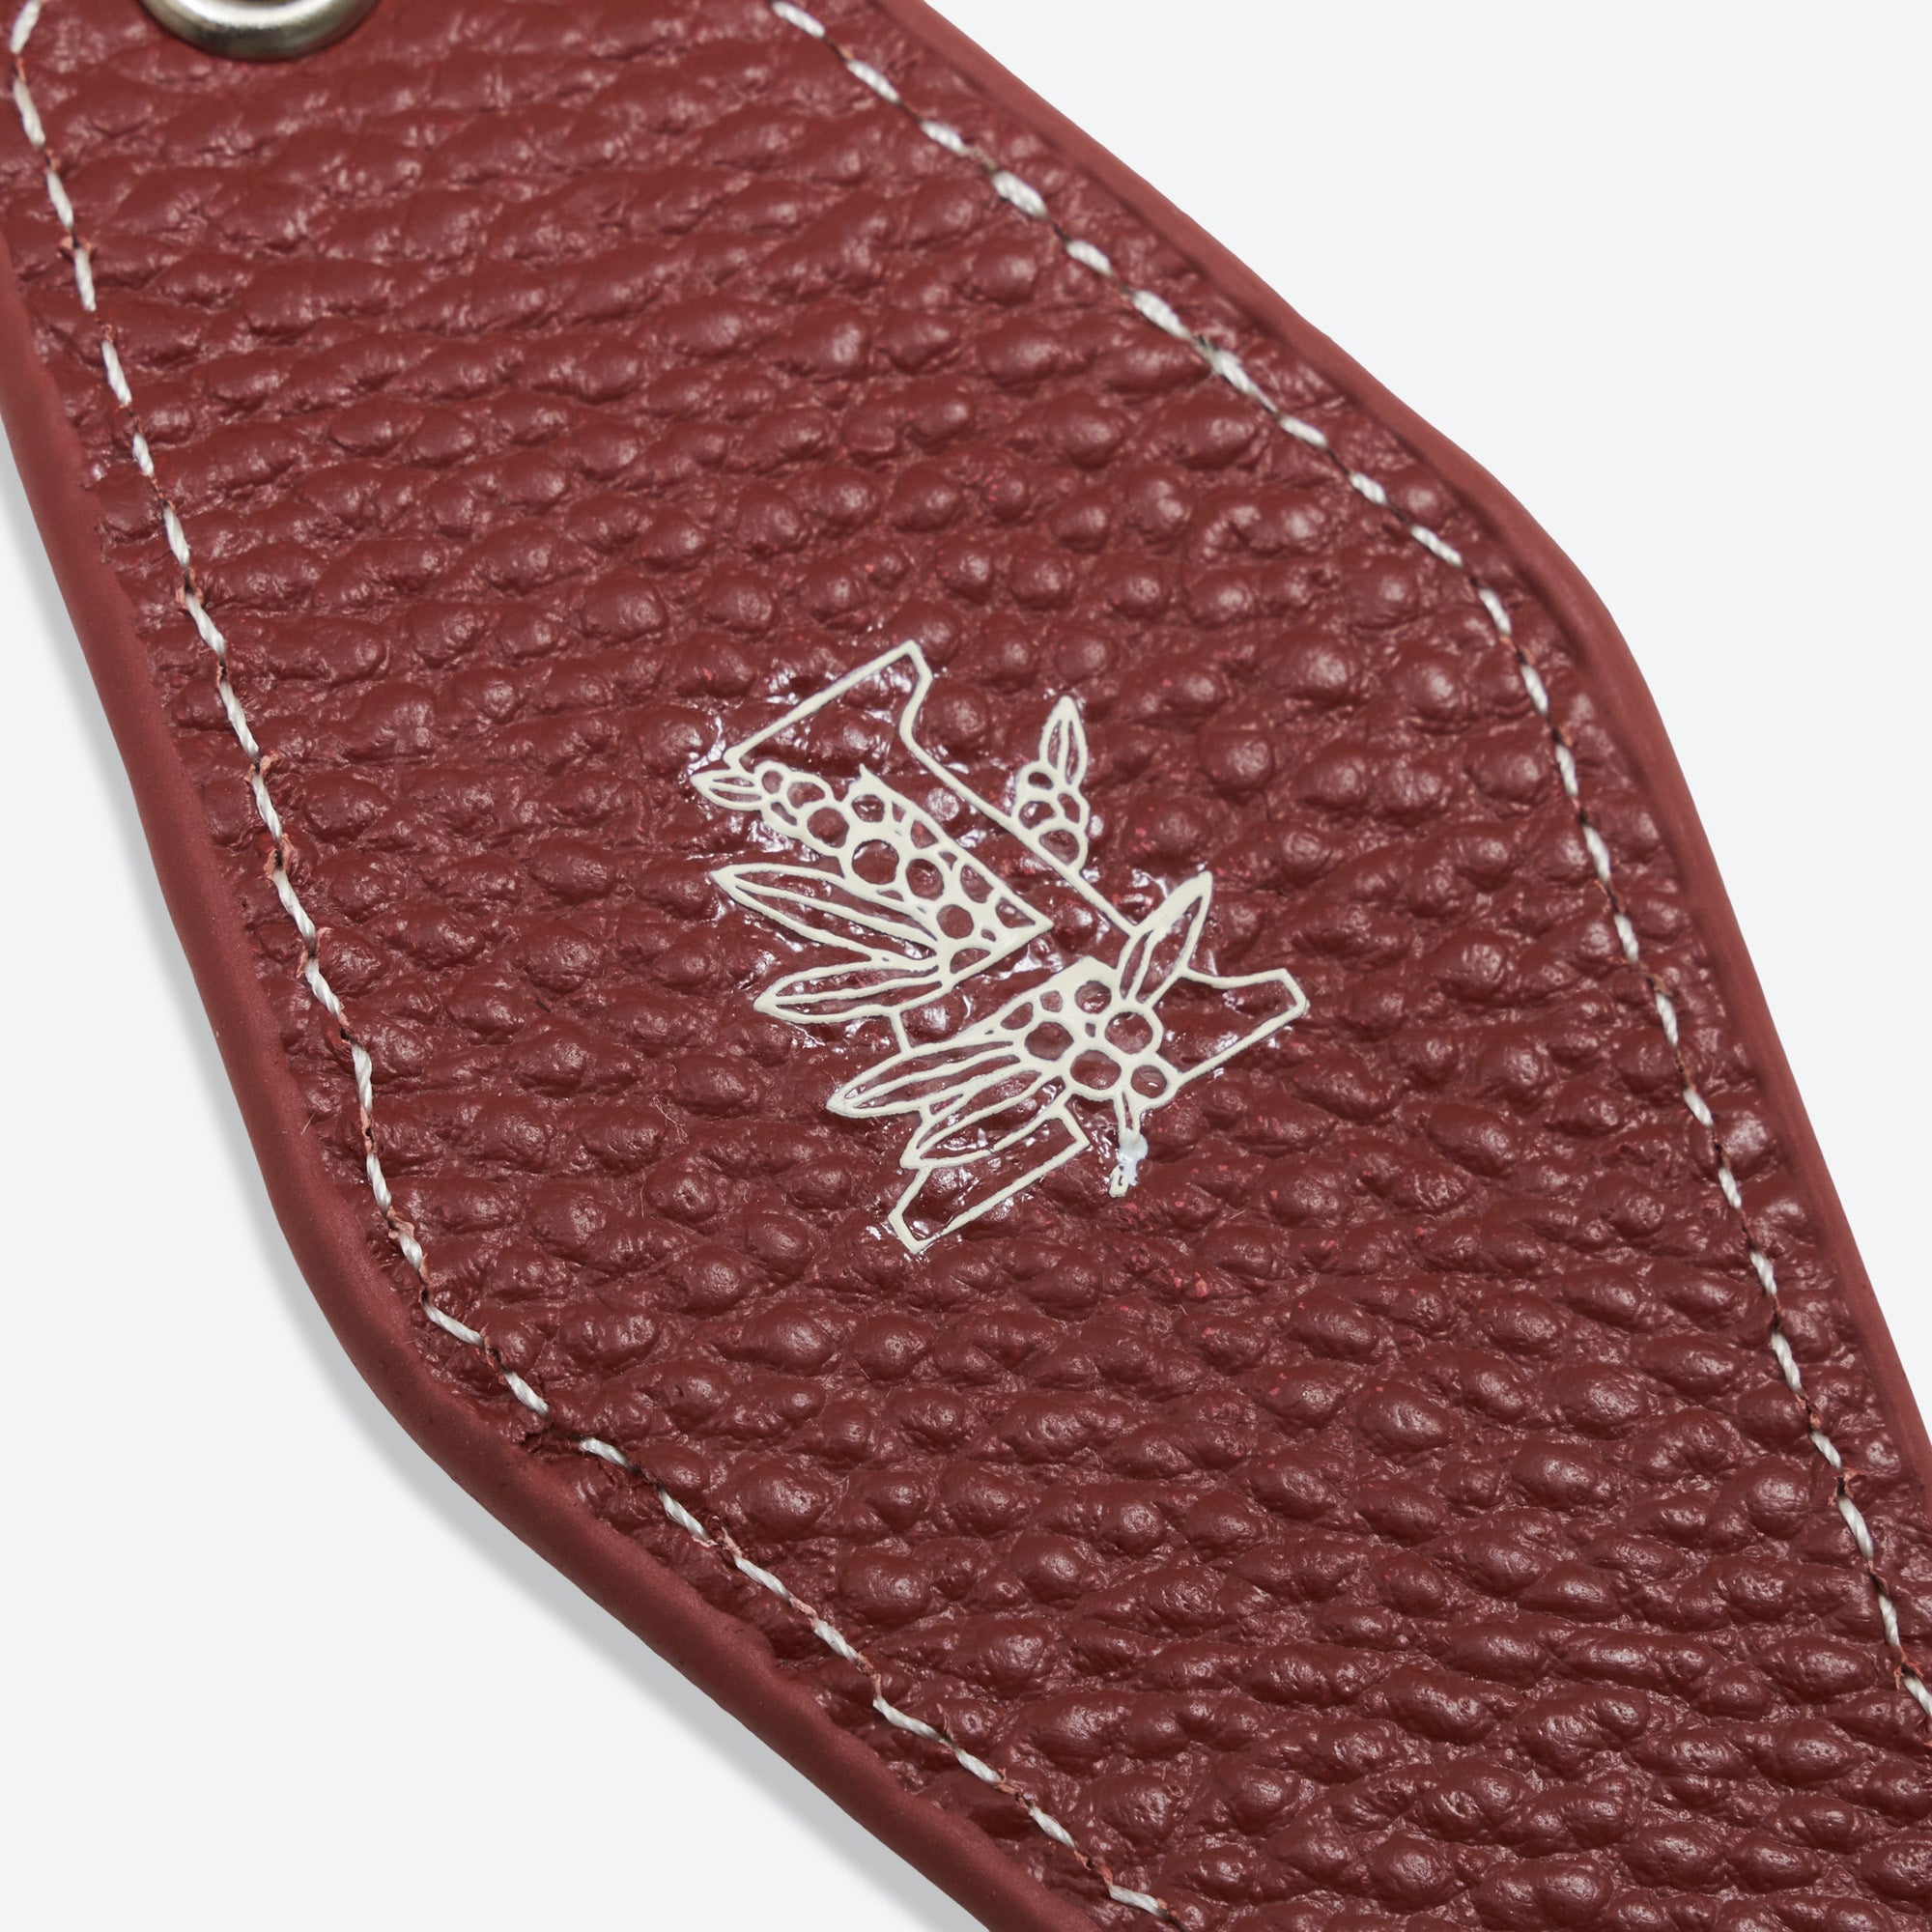 Alfred's Apartment - Leather Keychain - Red